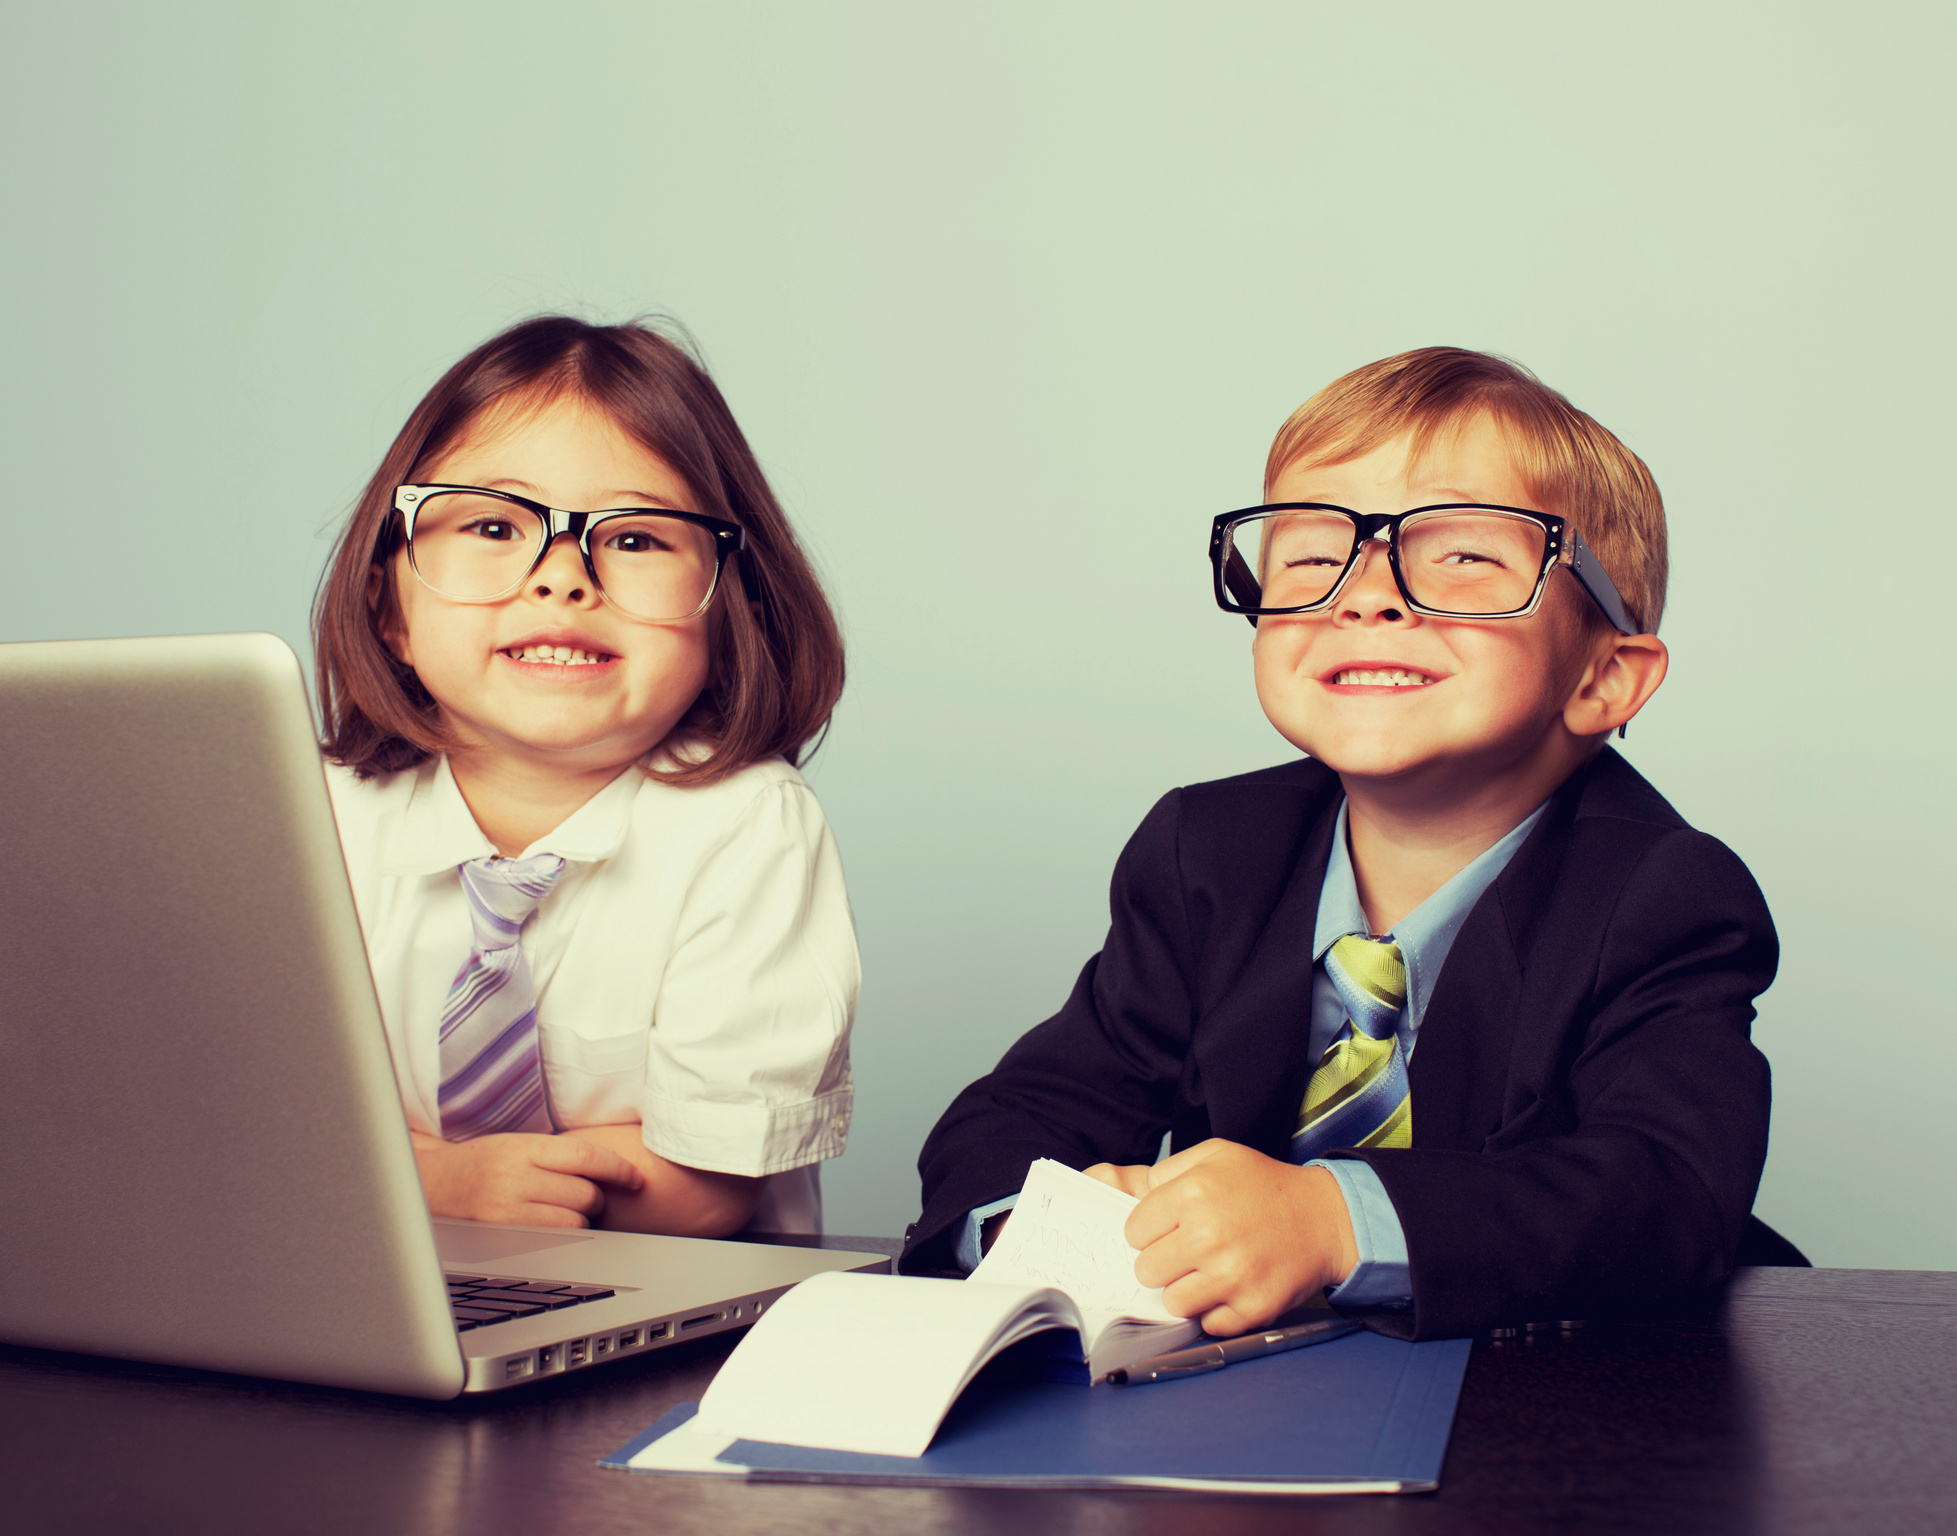 Business Children at Laptop in Office